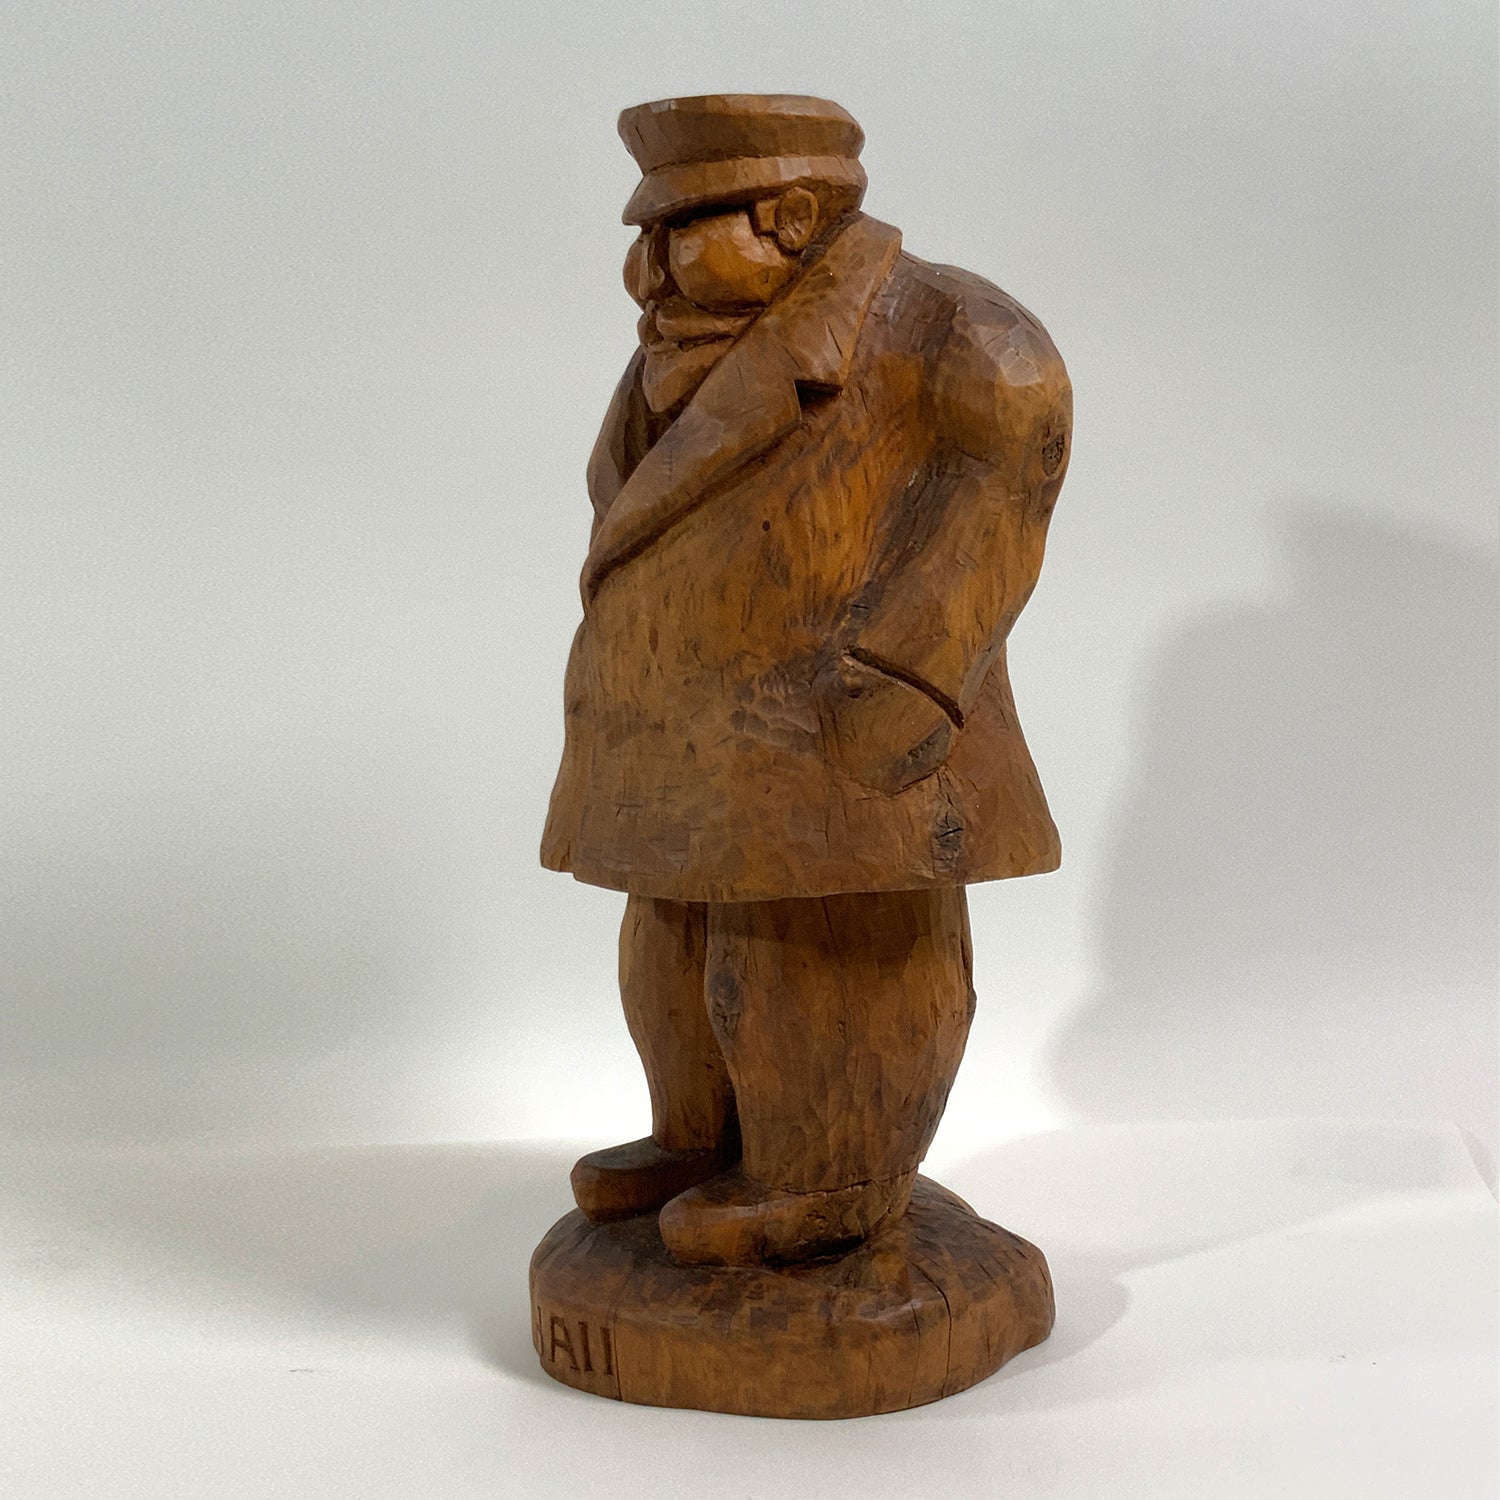 Carving Of Sea Captain "Hall" - Lannan Gallery